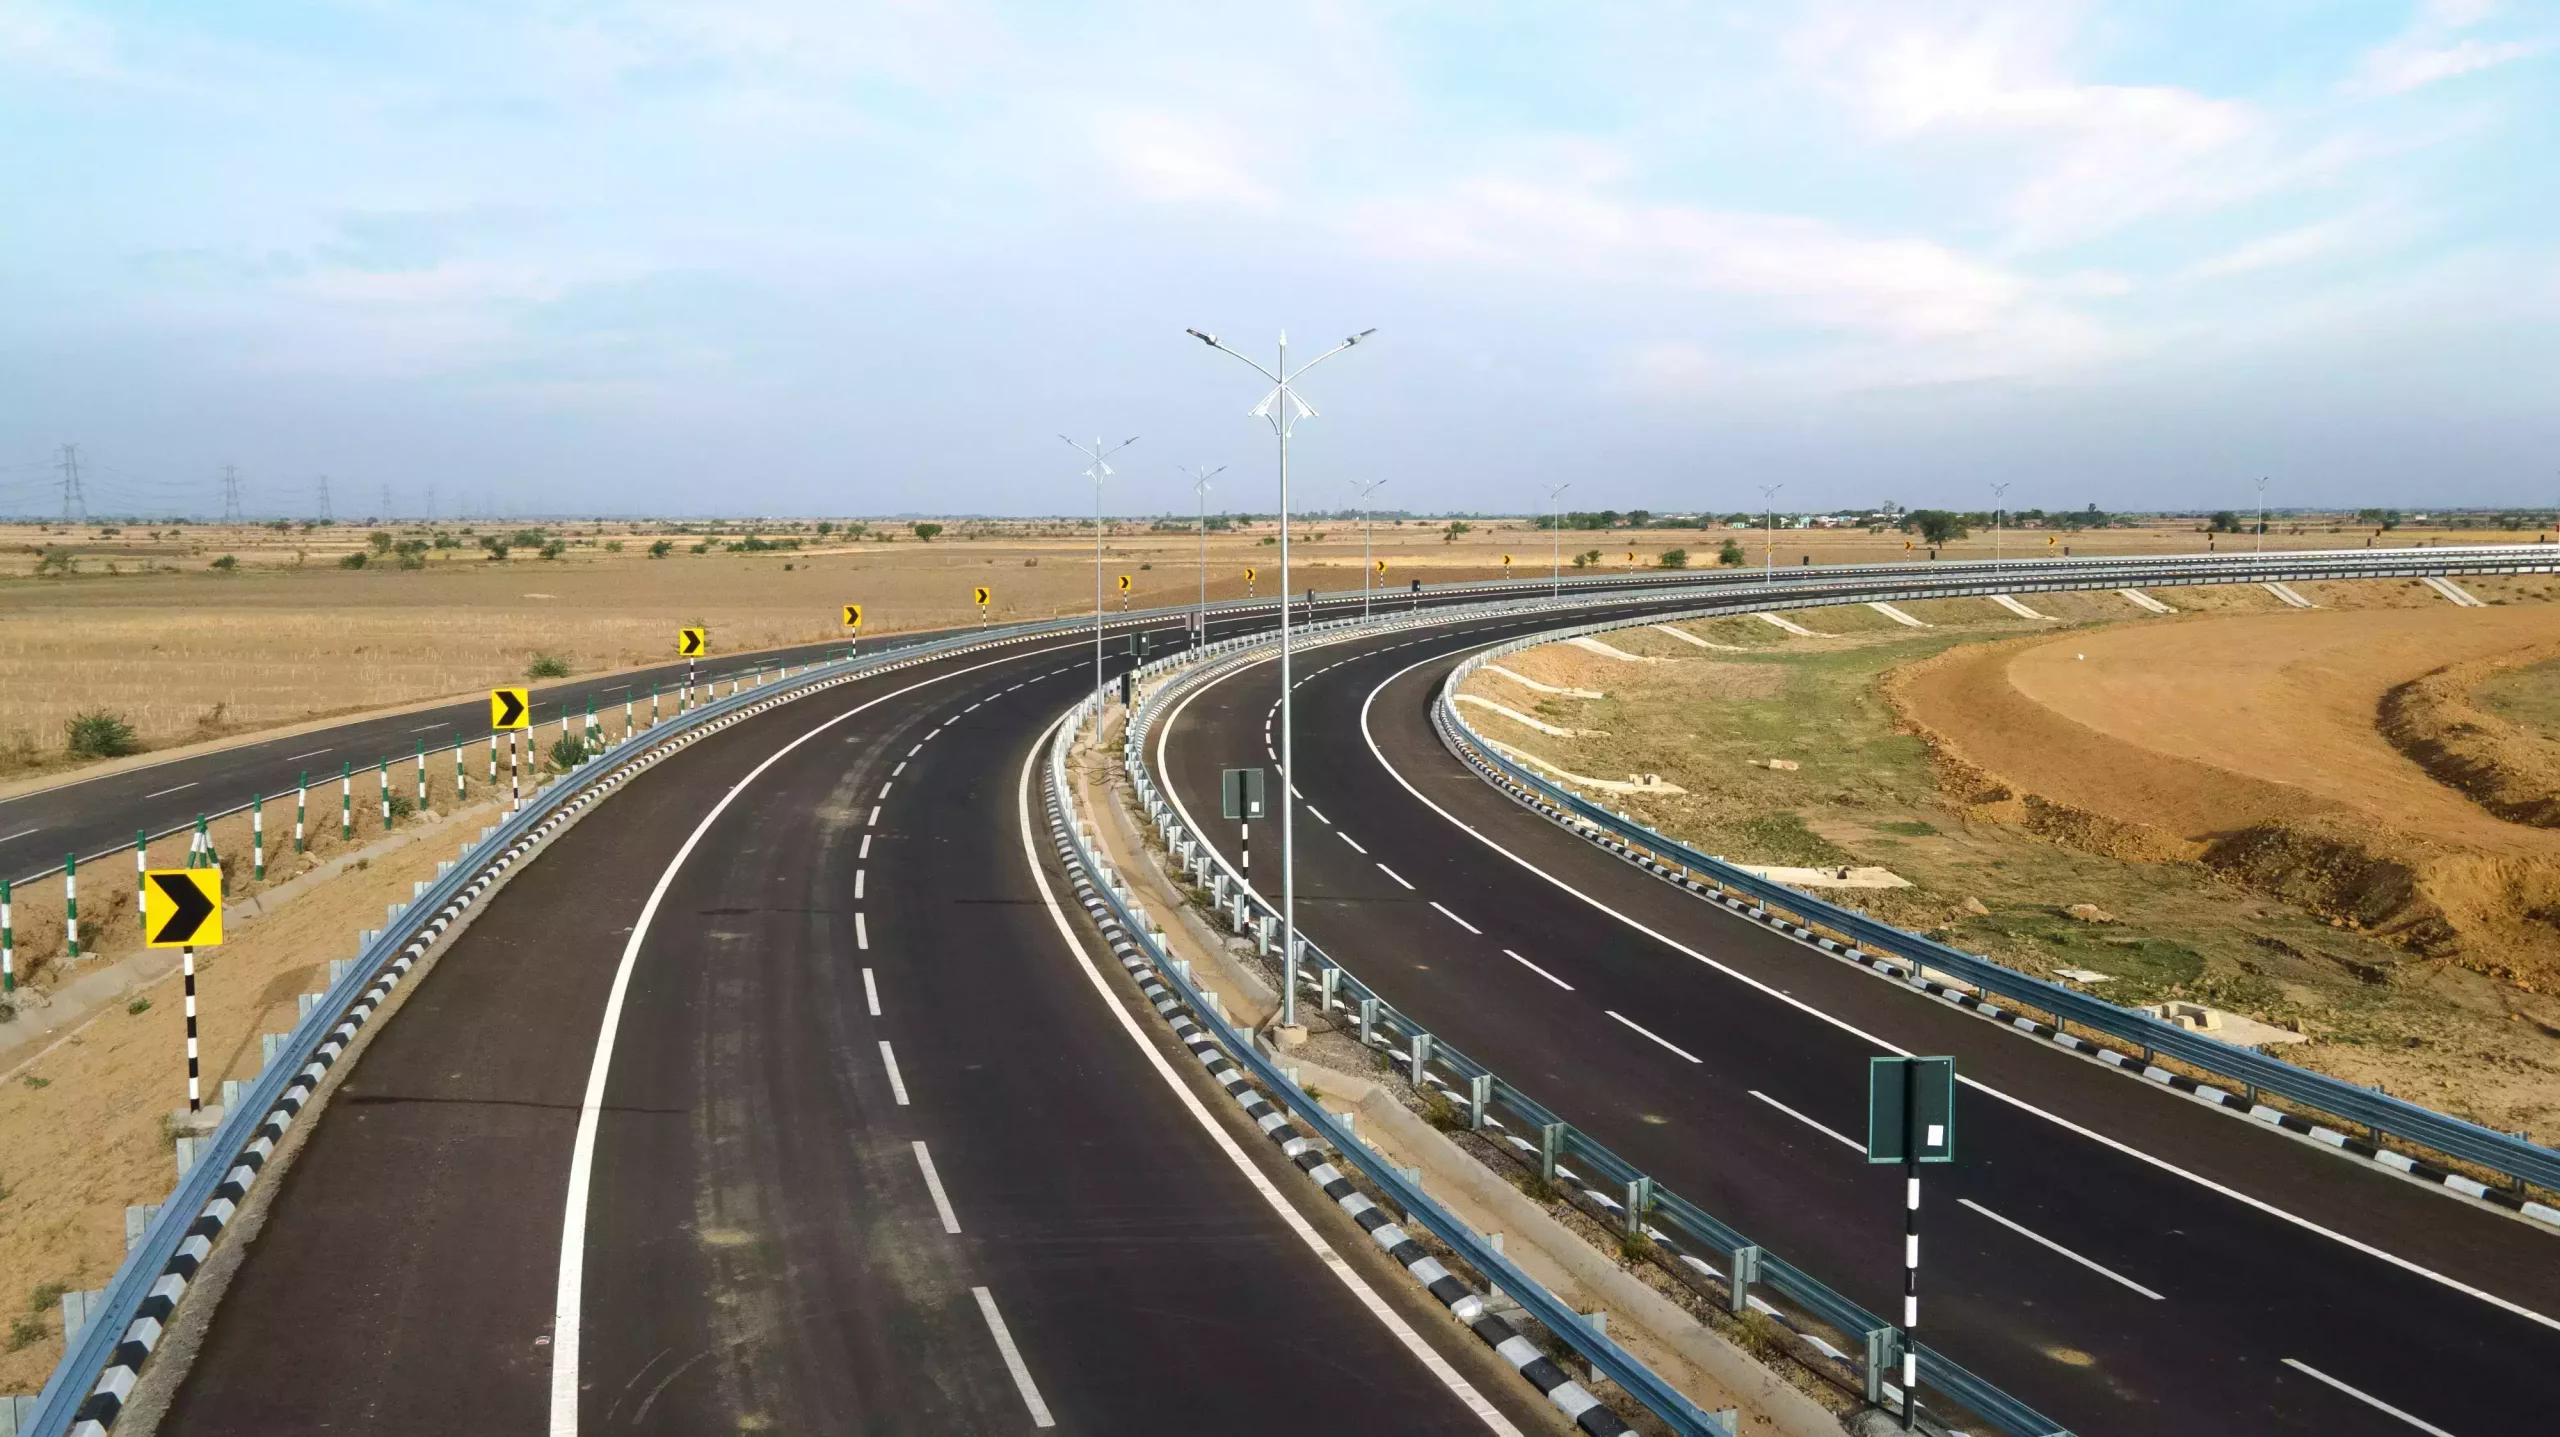 PM Modi to roll out highway projects worth Rs 18,100 crore in Rajasthan today